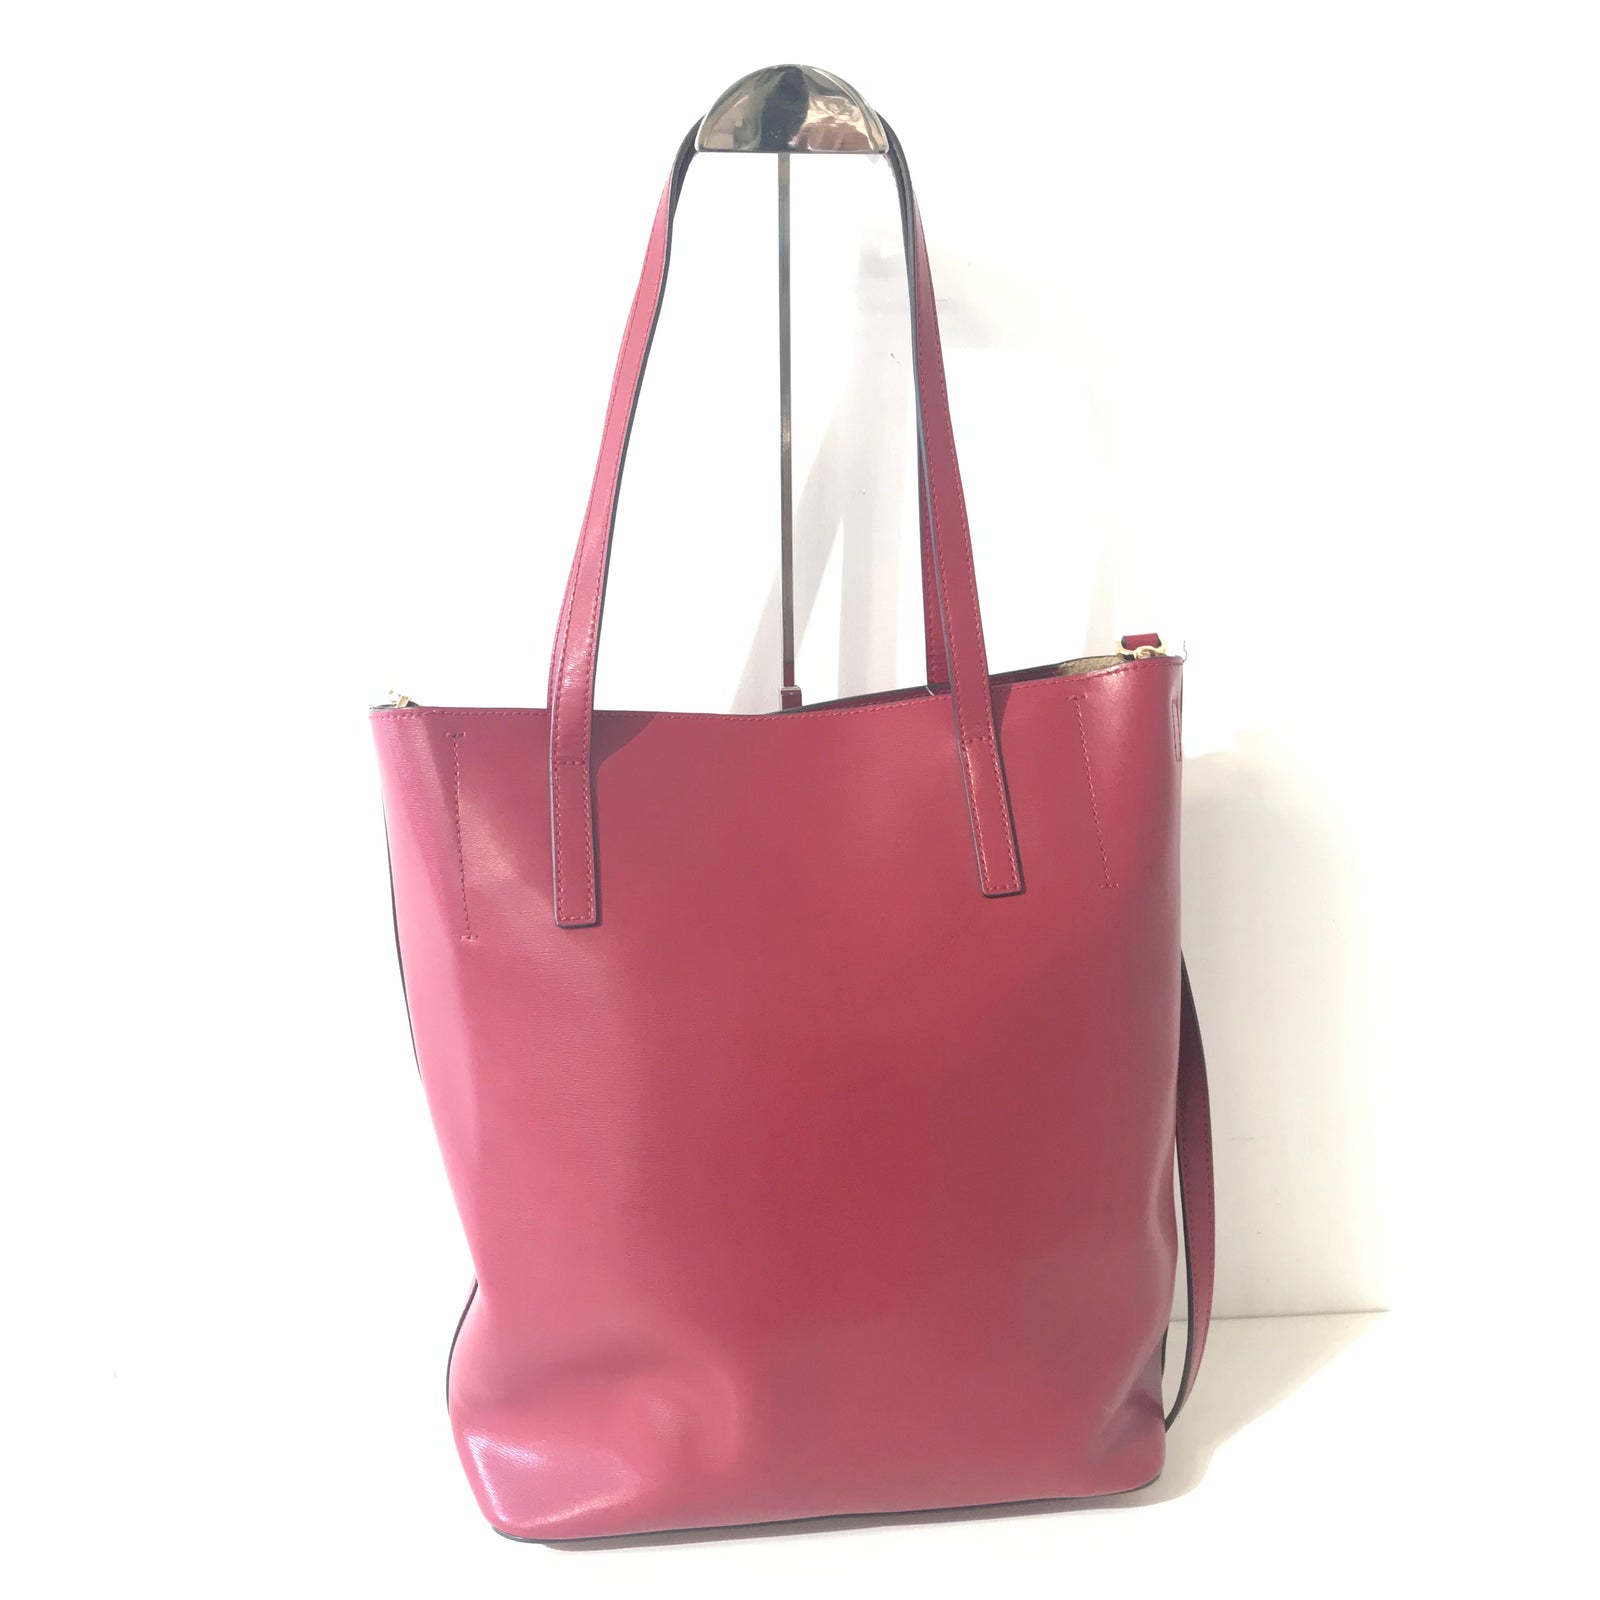 Red Tote